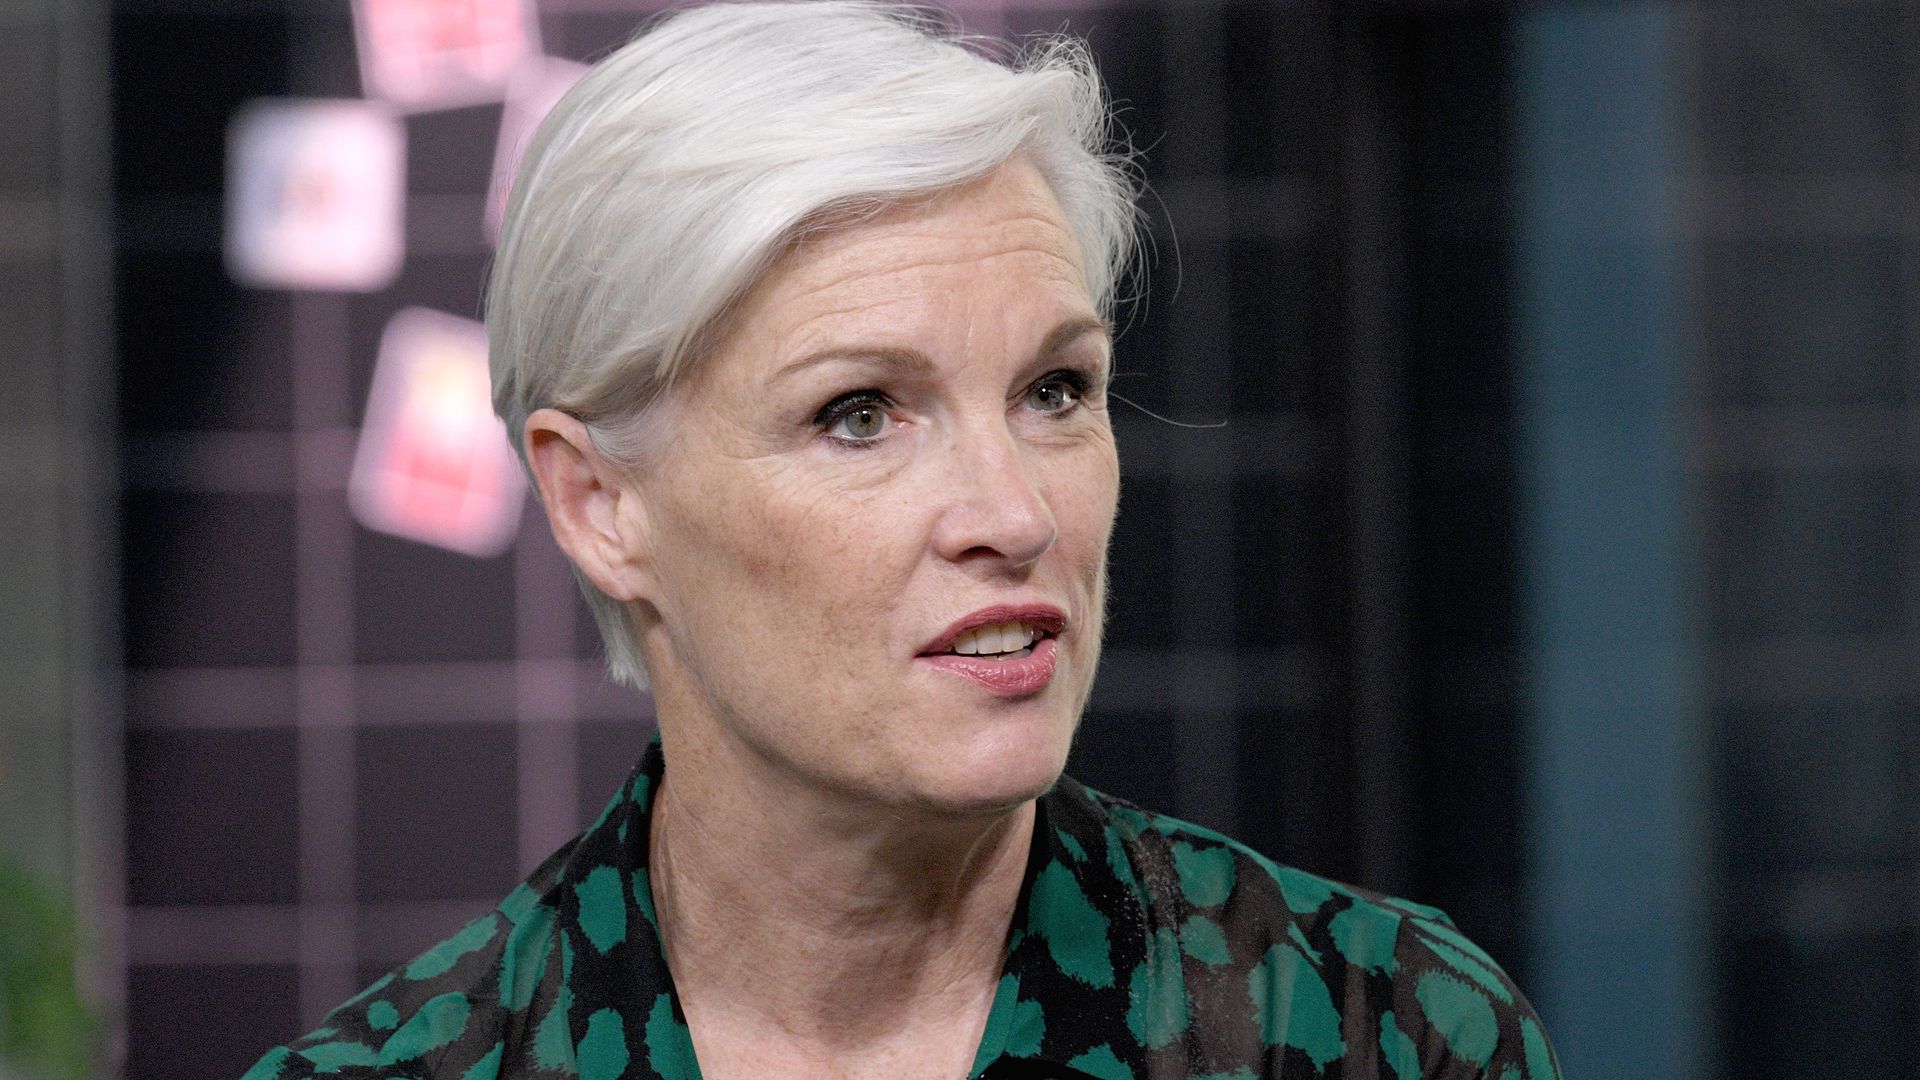 Former President of Planned Parenthood, author Cecile Richards in October 2019